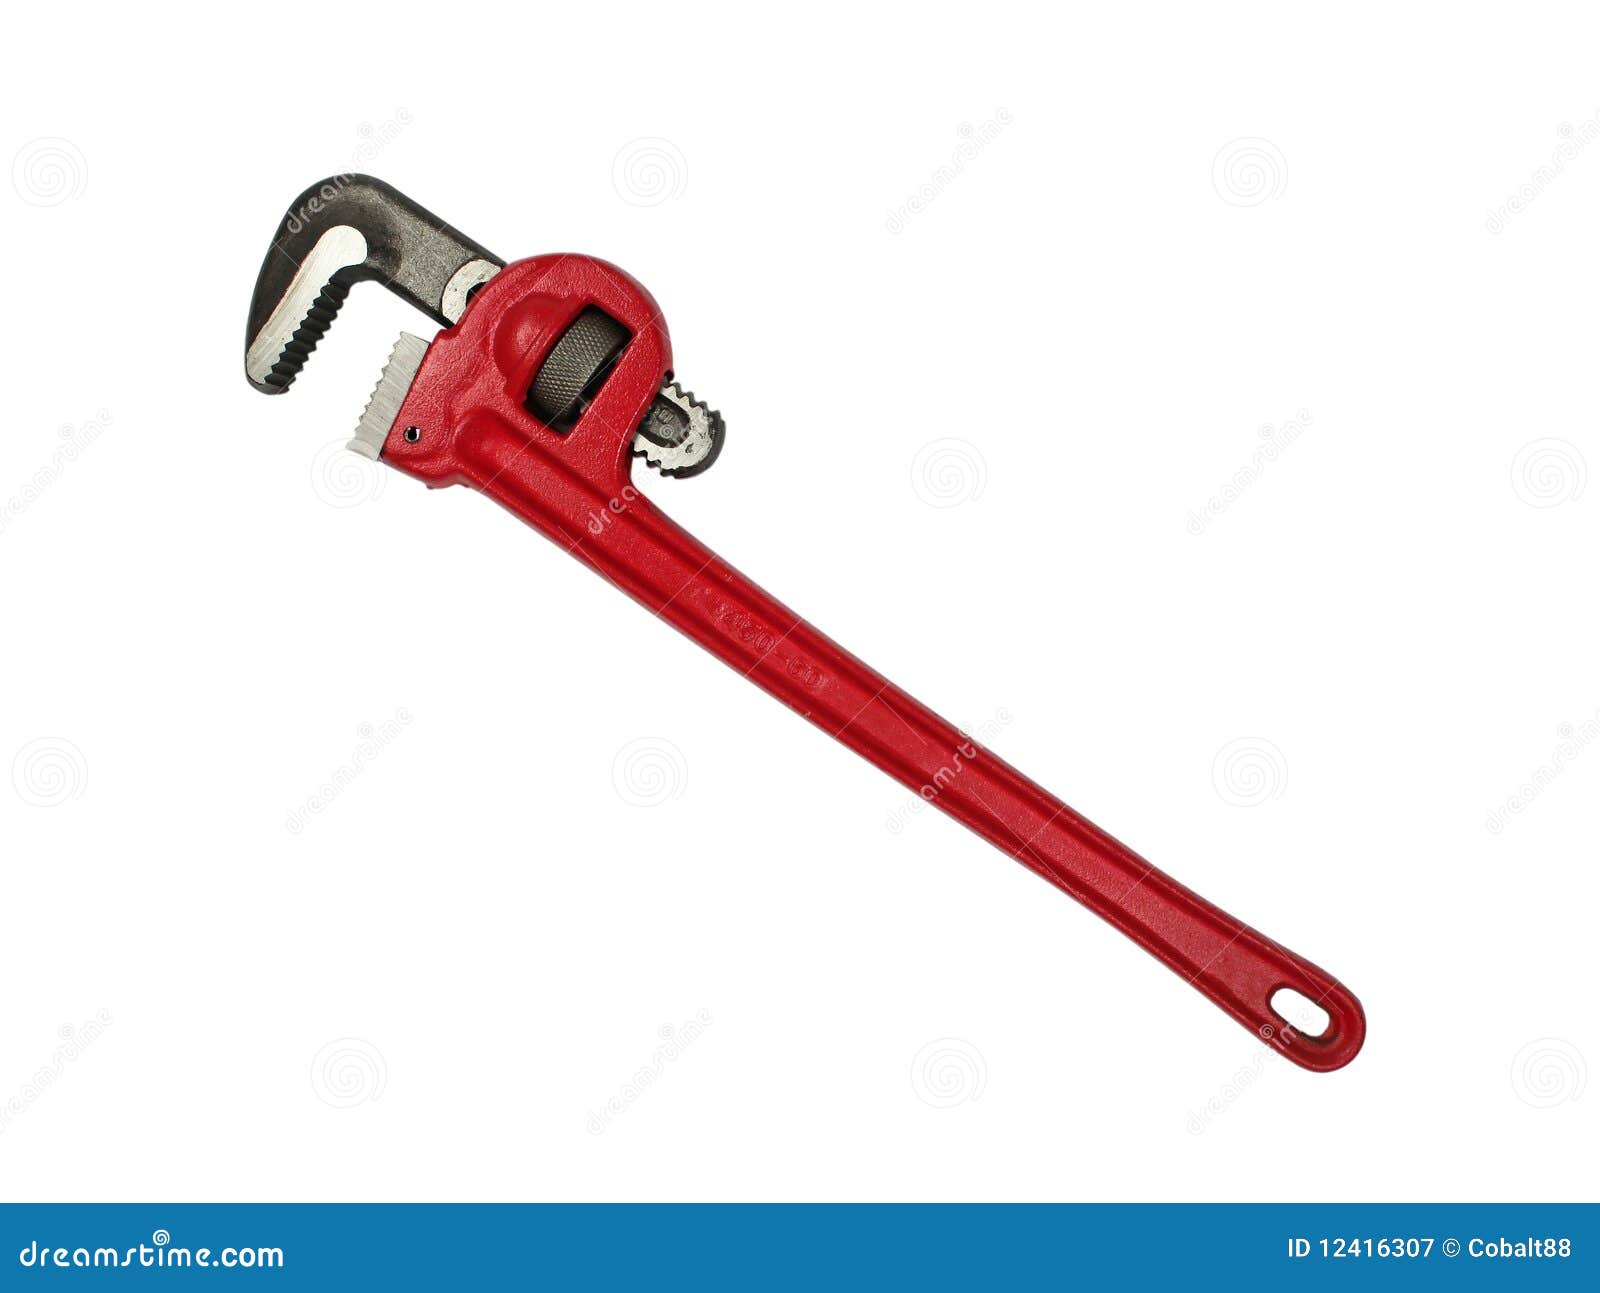 tools - end pipe wrench